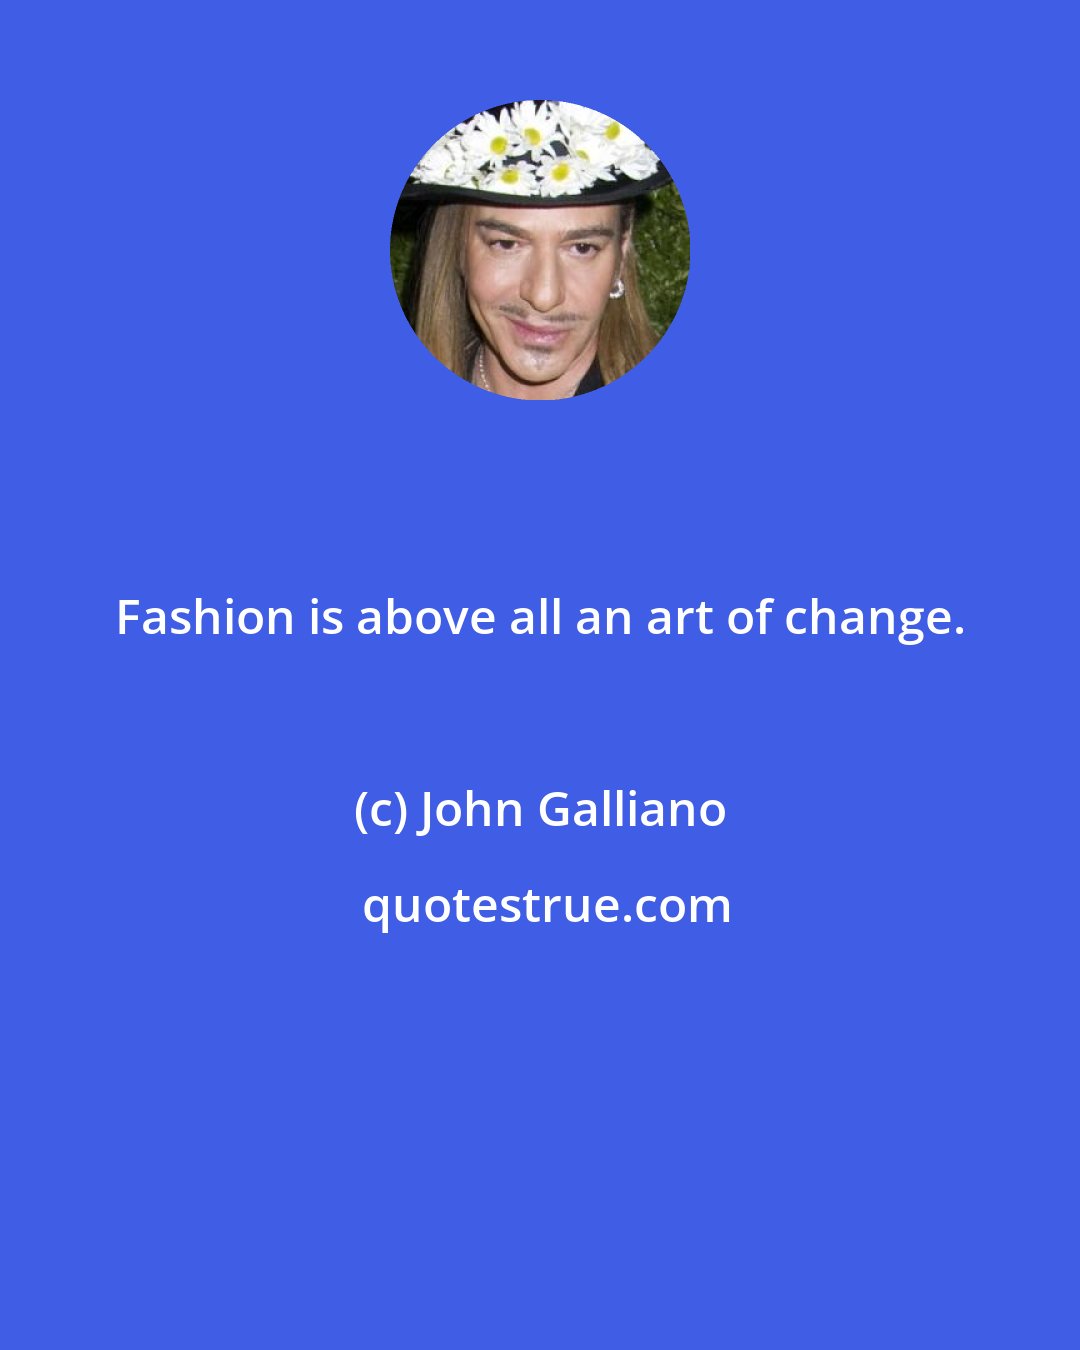 John Galliano: Fashion is above all an art of change.